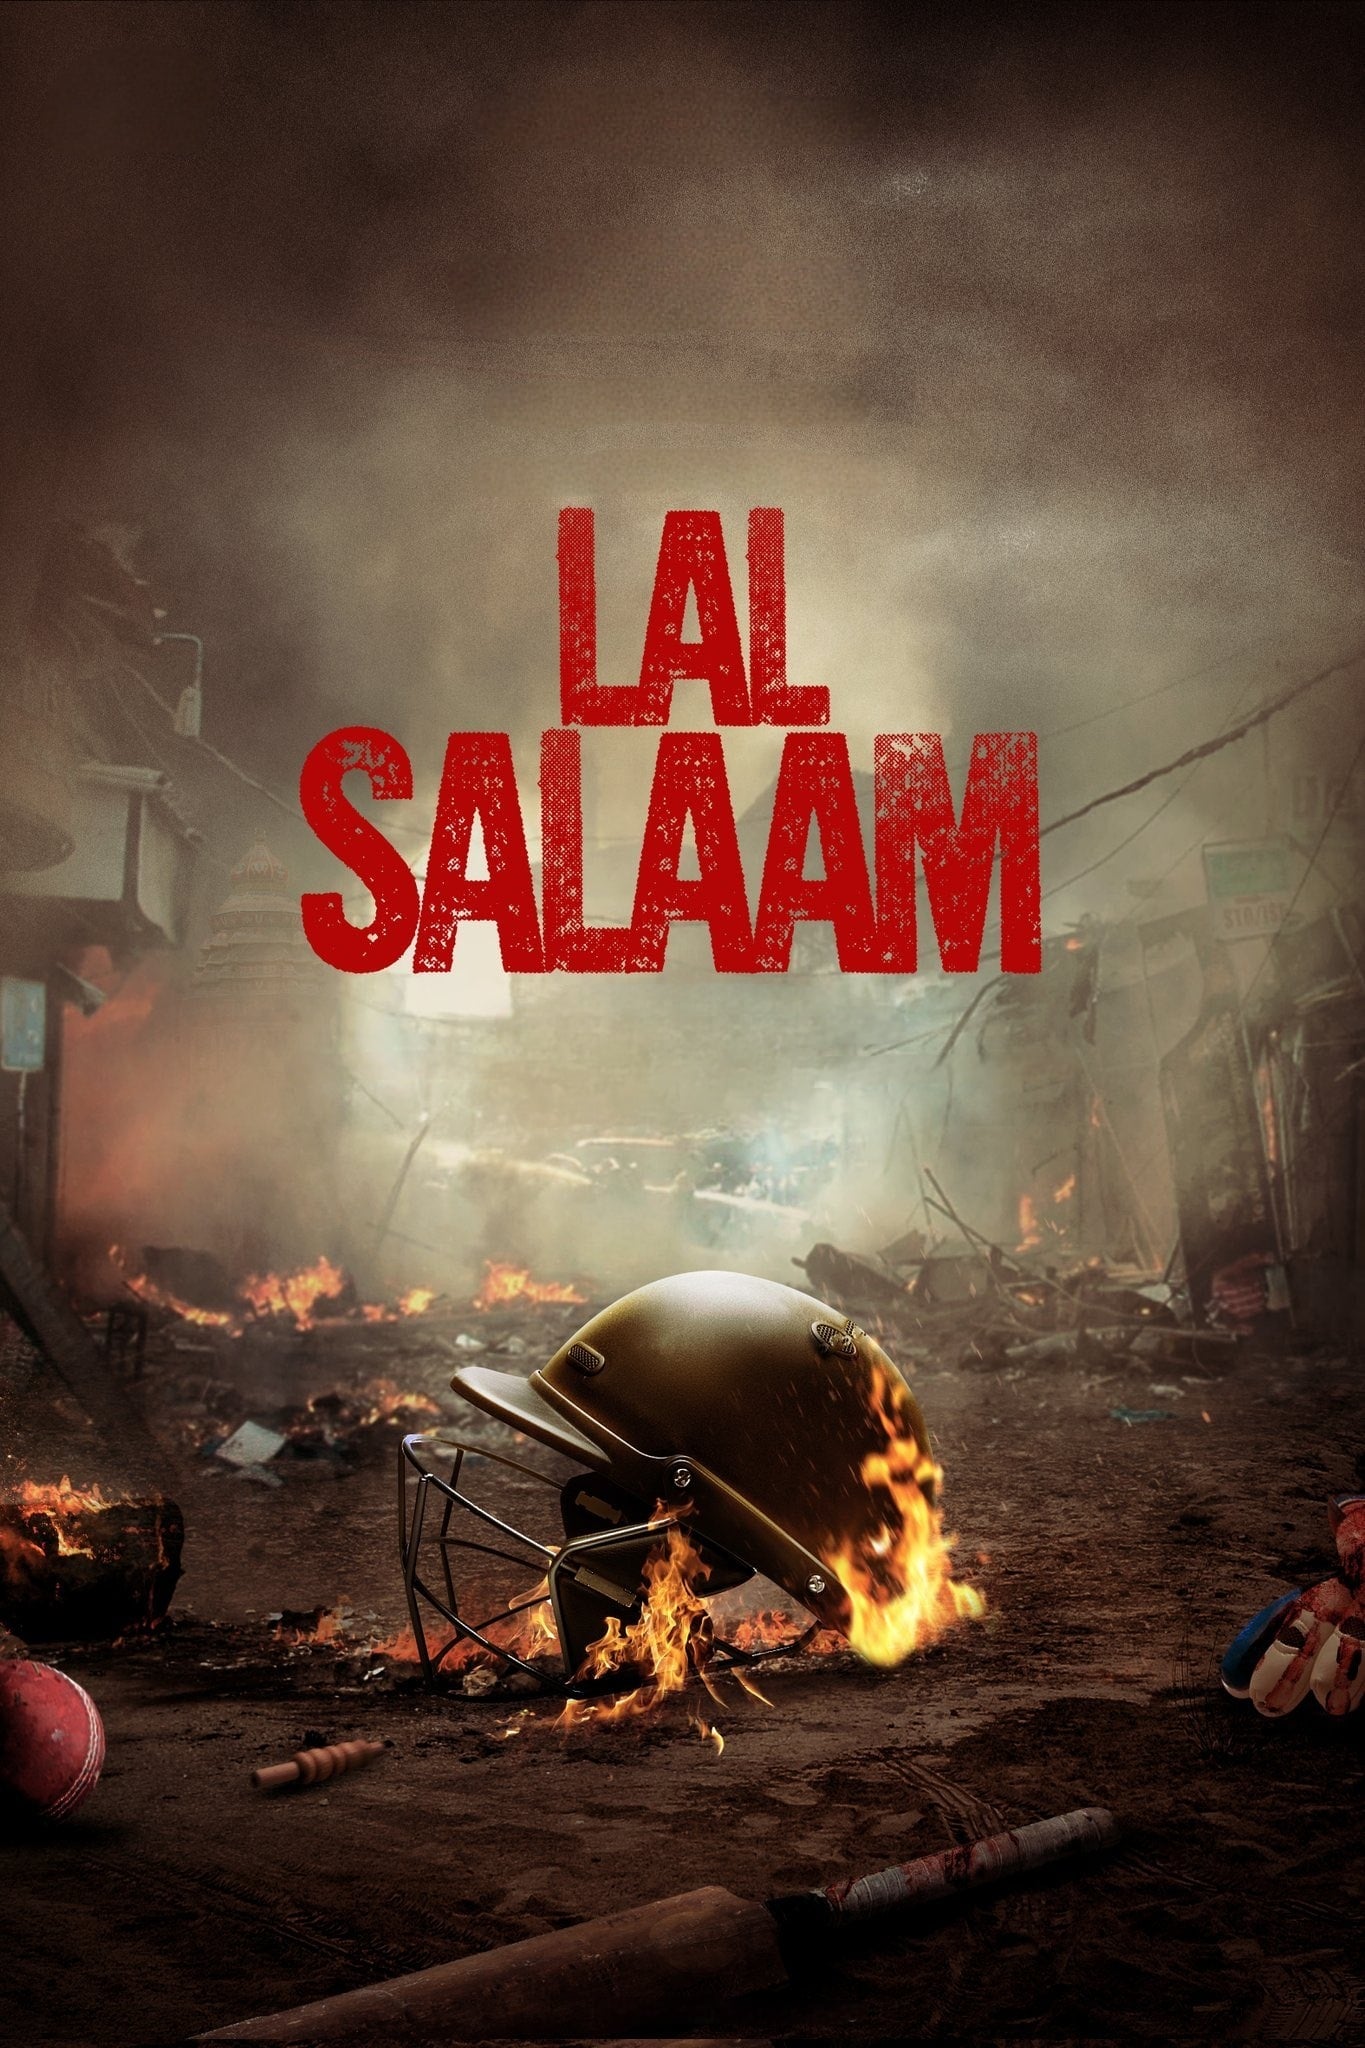 Poster for the movie "Lal Salaam"